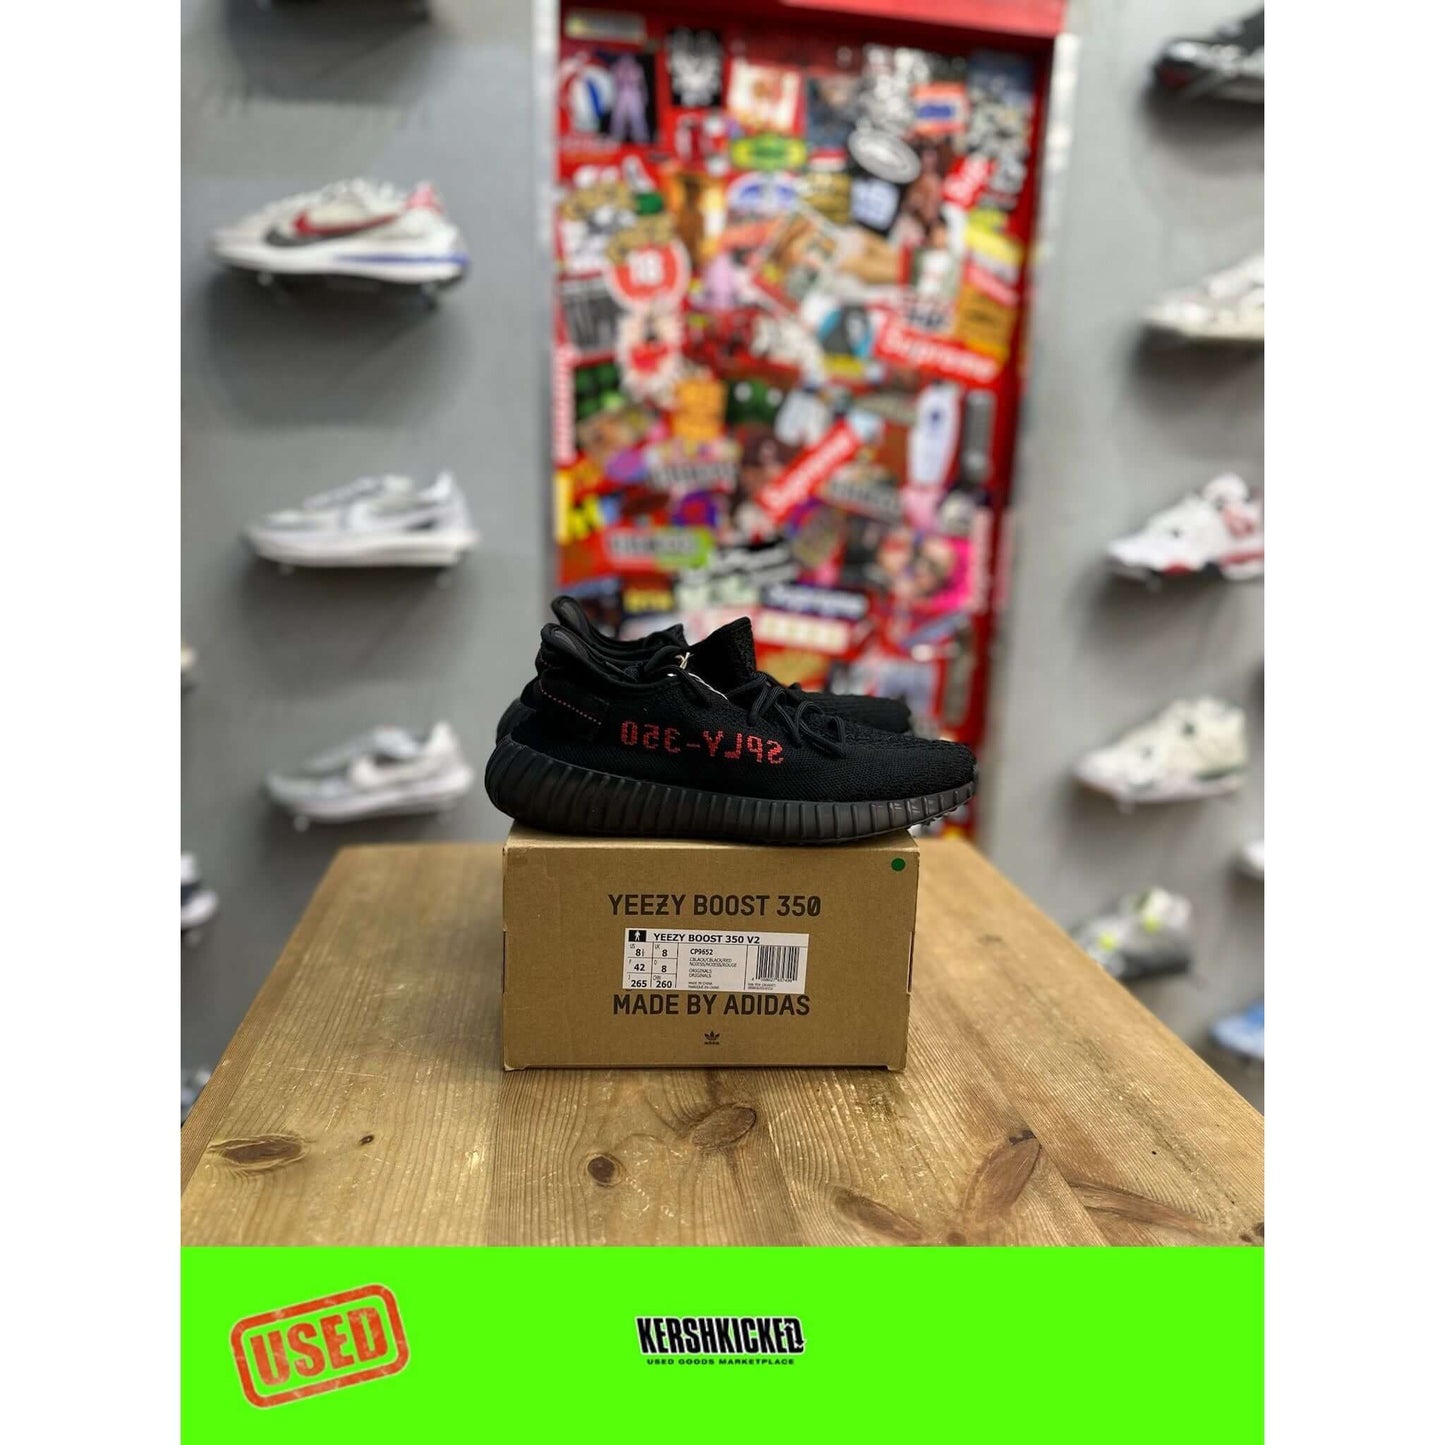 Adidas Yeezy Boost 350 V2 Black Red UK 8 from Yeezy